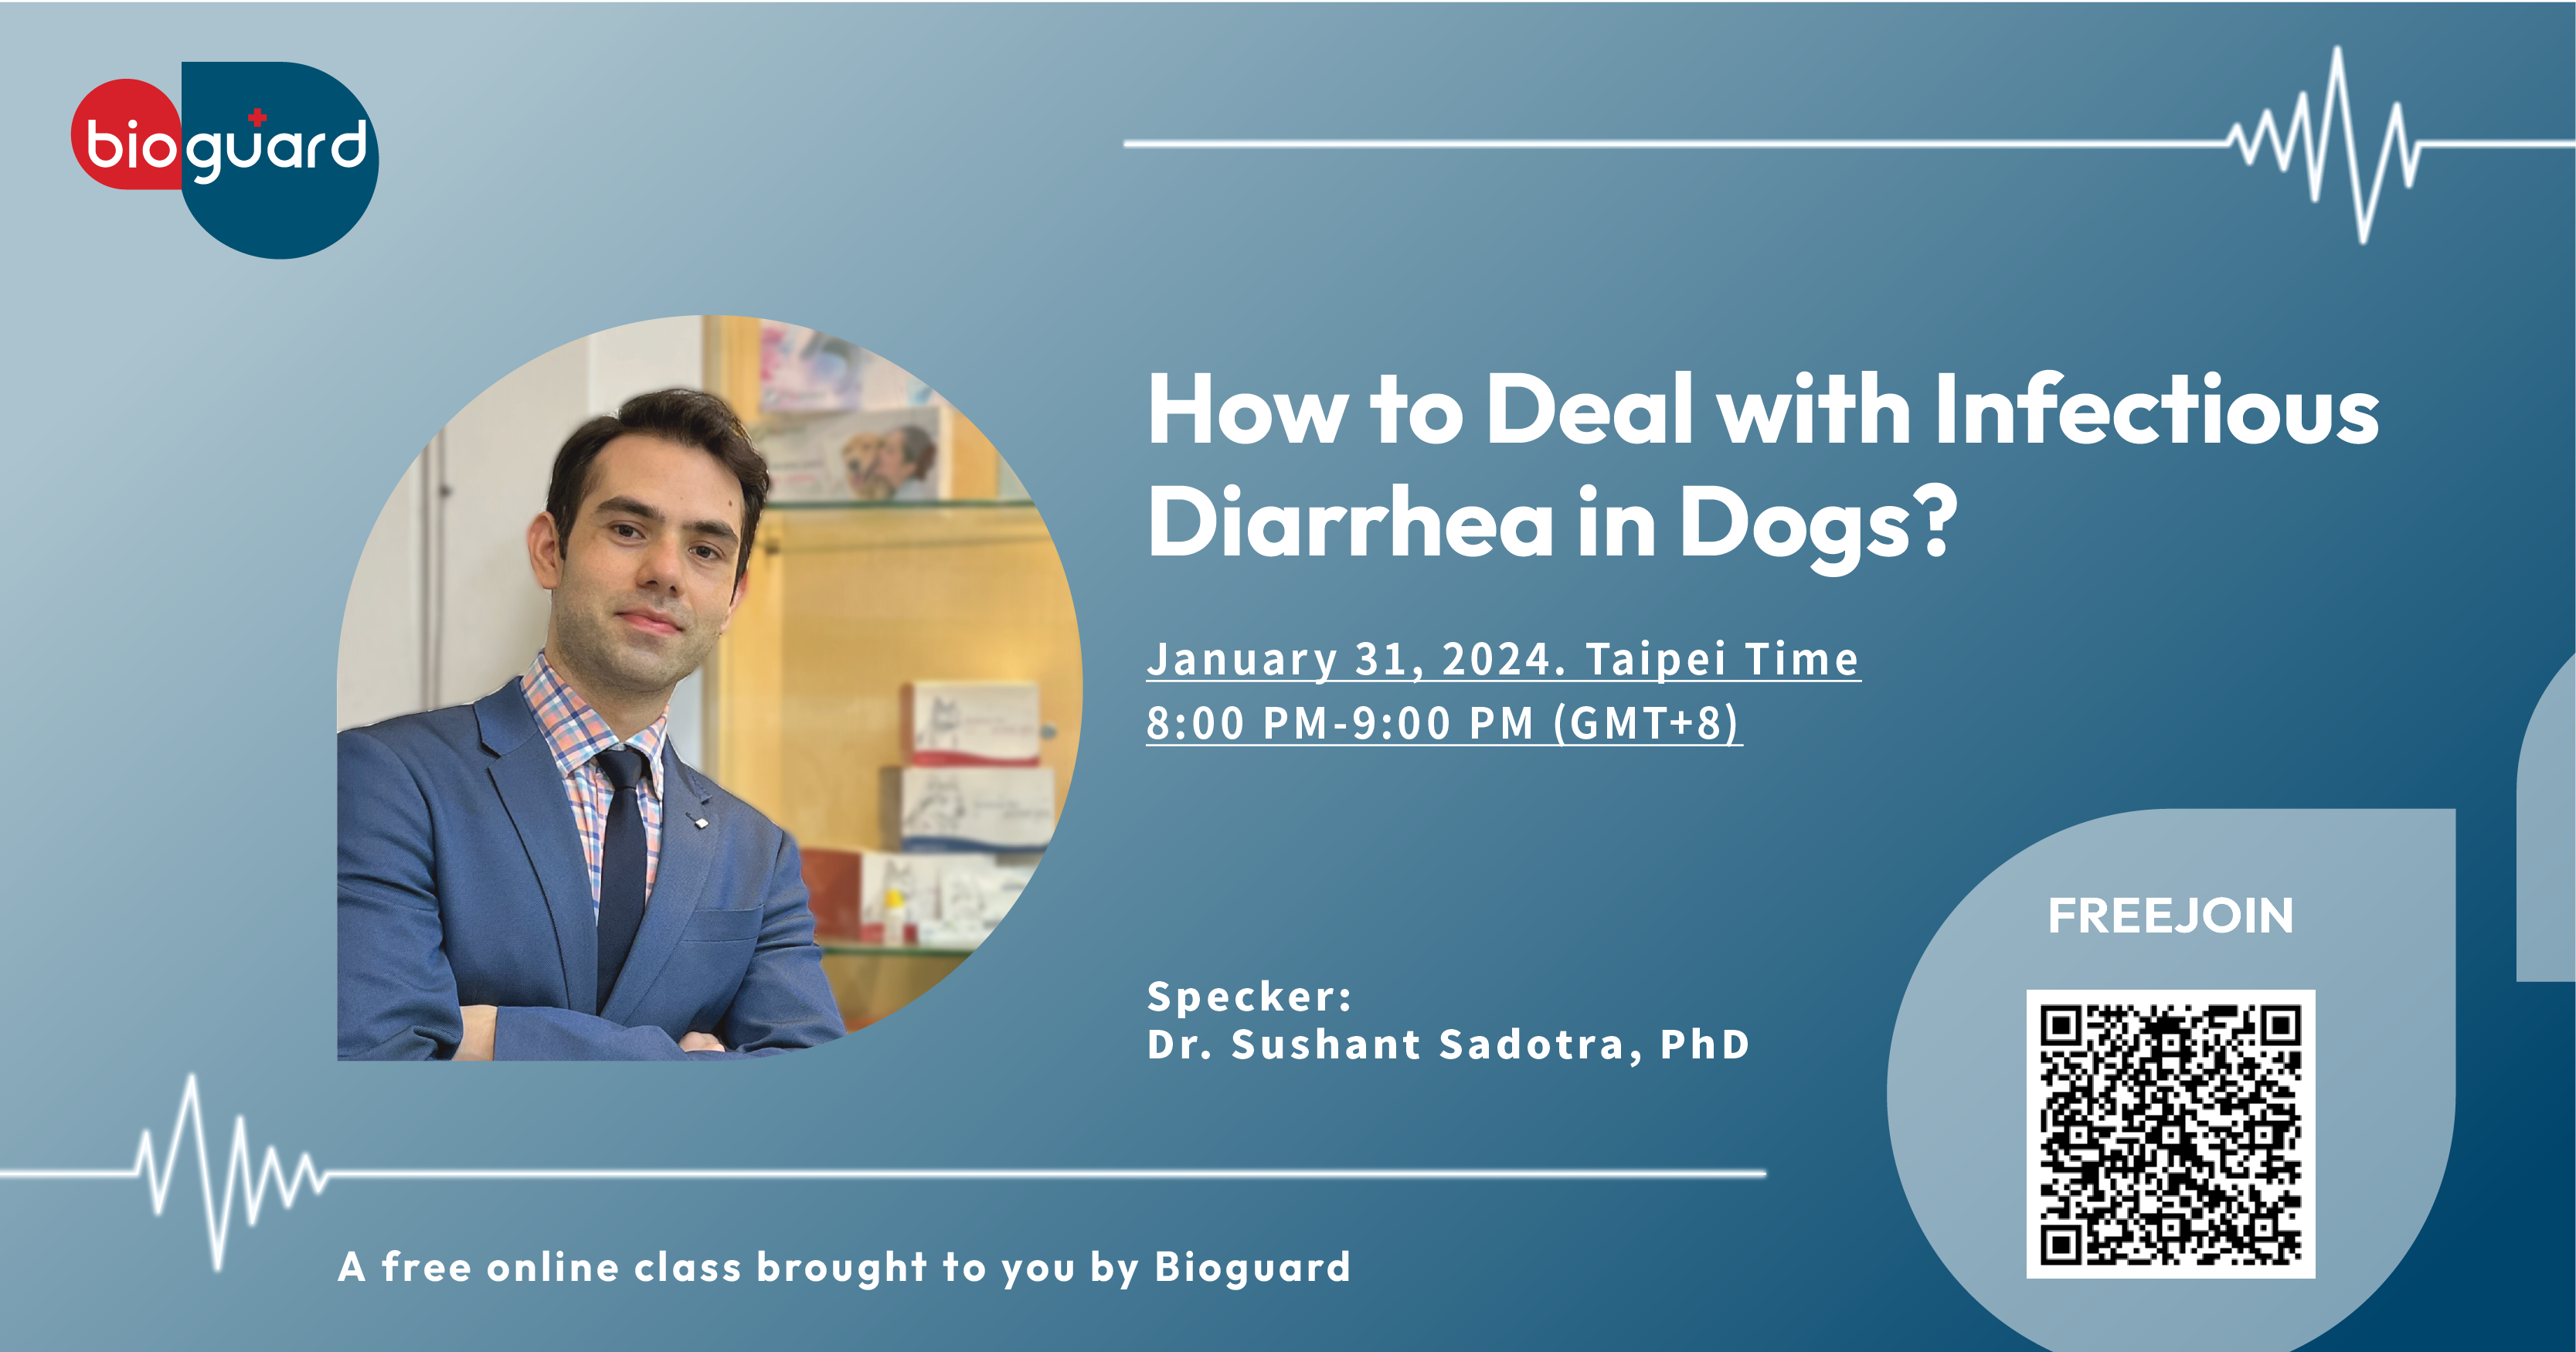 How to Deal with Infectious Diarrhea in Dogs